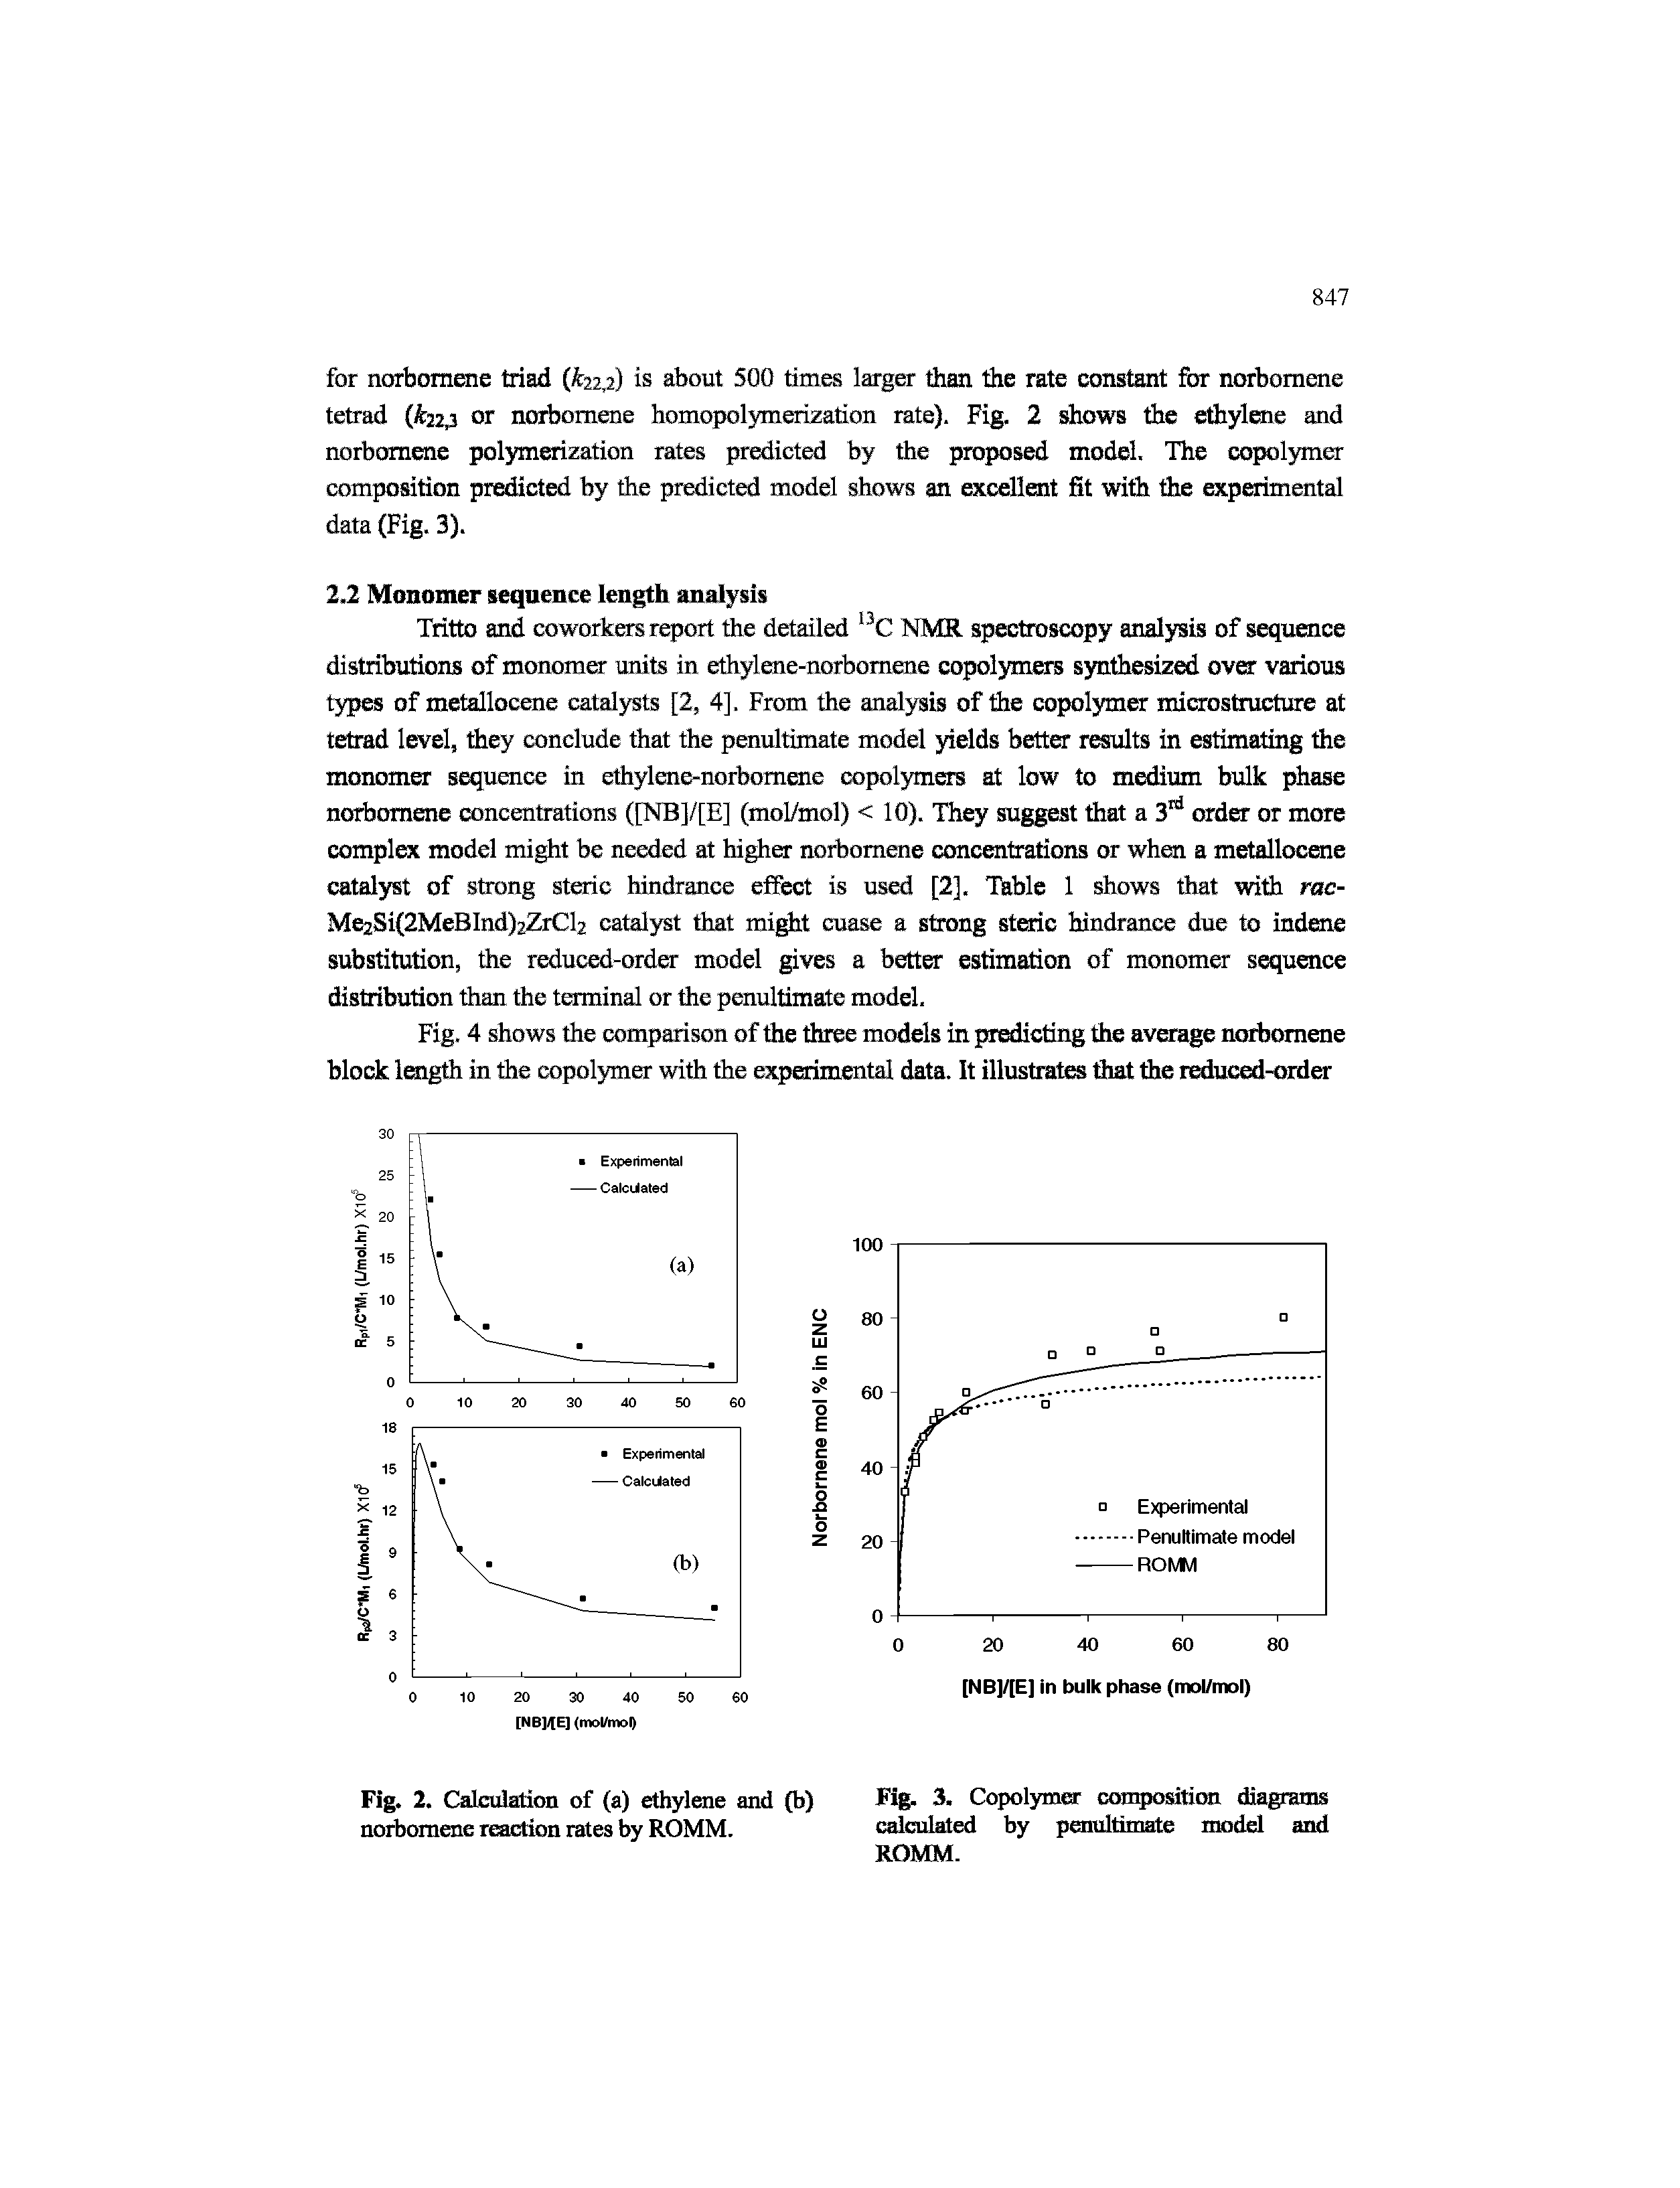 Fig. 3. Copolymer composition diagrams calculated by penultiii e nmdel and ROMM.